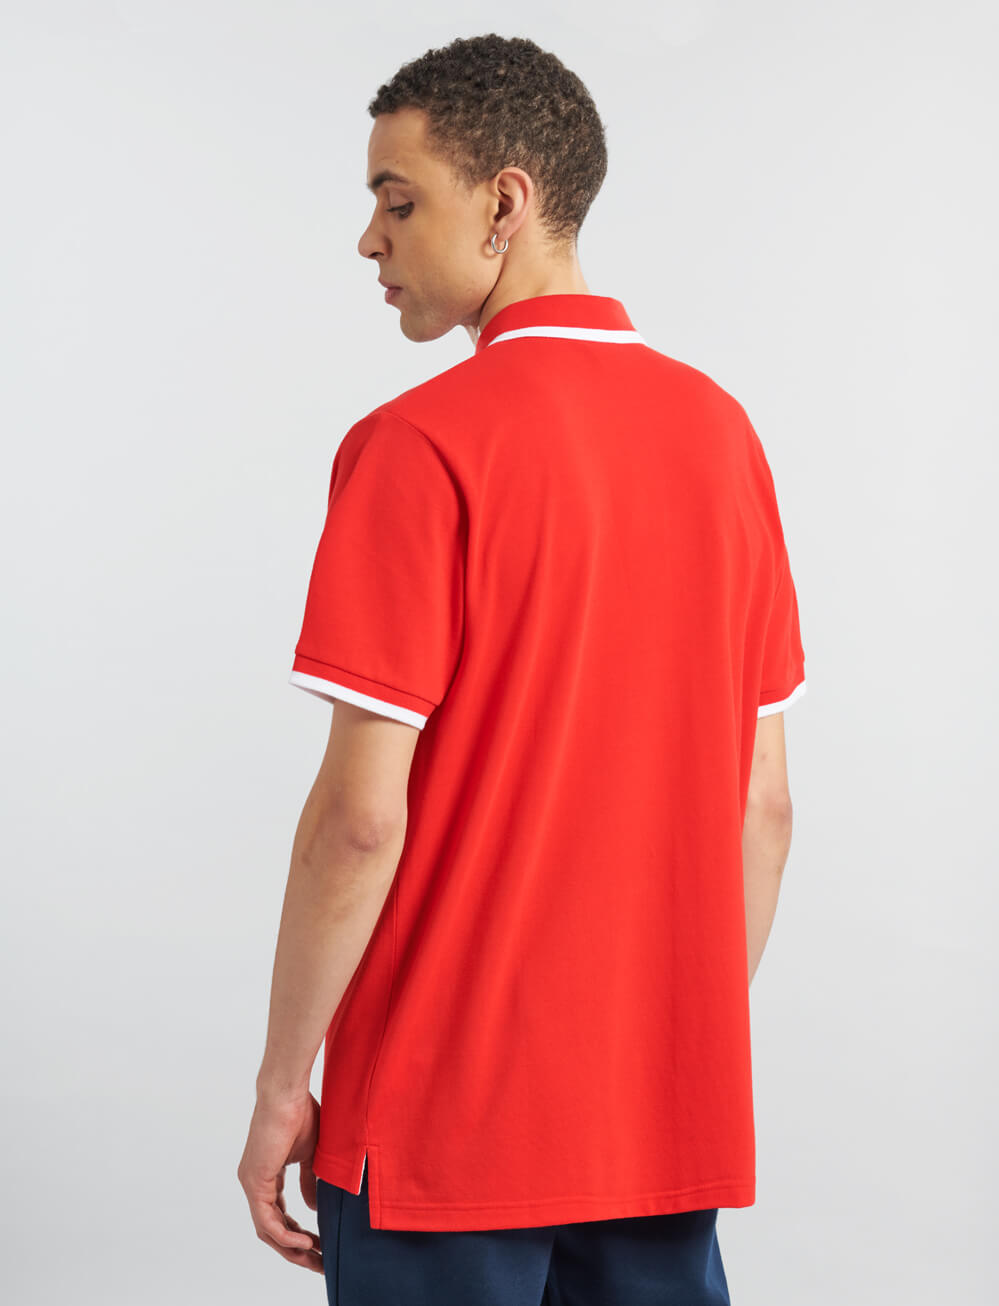 Official Arsenal Tipped Polo - Red - The World Football Store